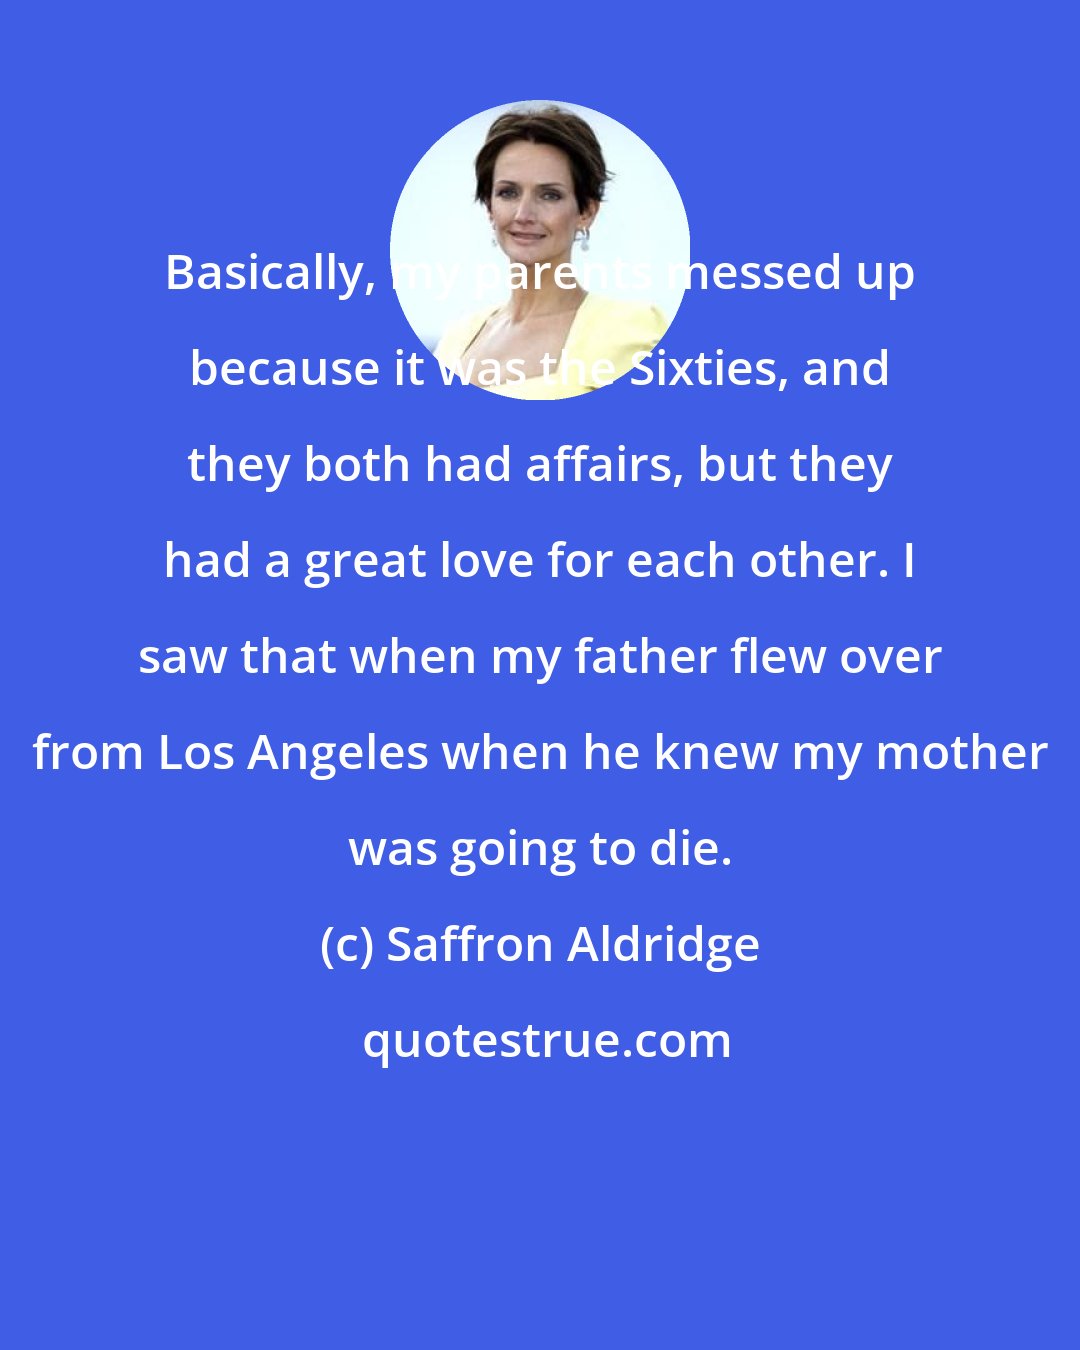 Saffron Aldridge: Basically, my parents messed up because it was the Sixties, and they both had affairs, but they had a great love for each other. I saw that when my father flew over from Los Angeles when he knew my mother was going to die.